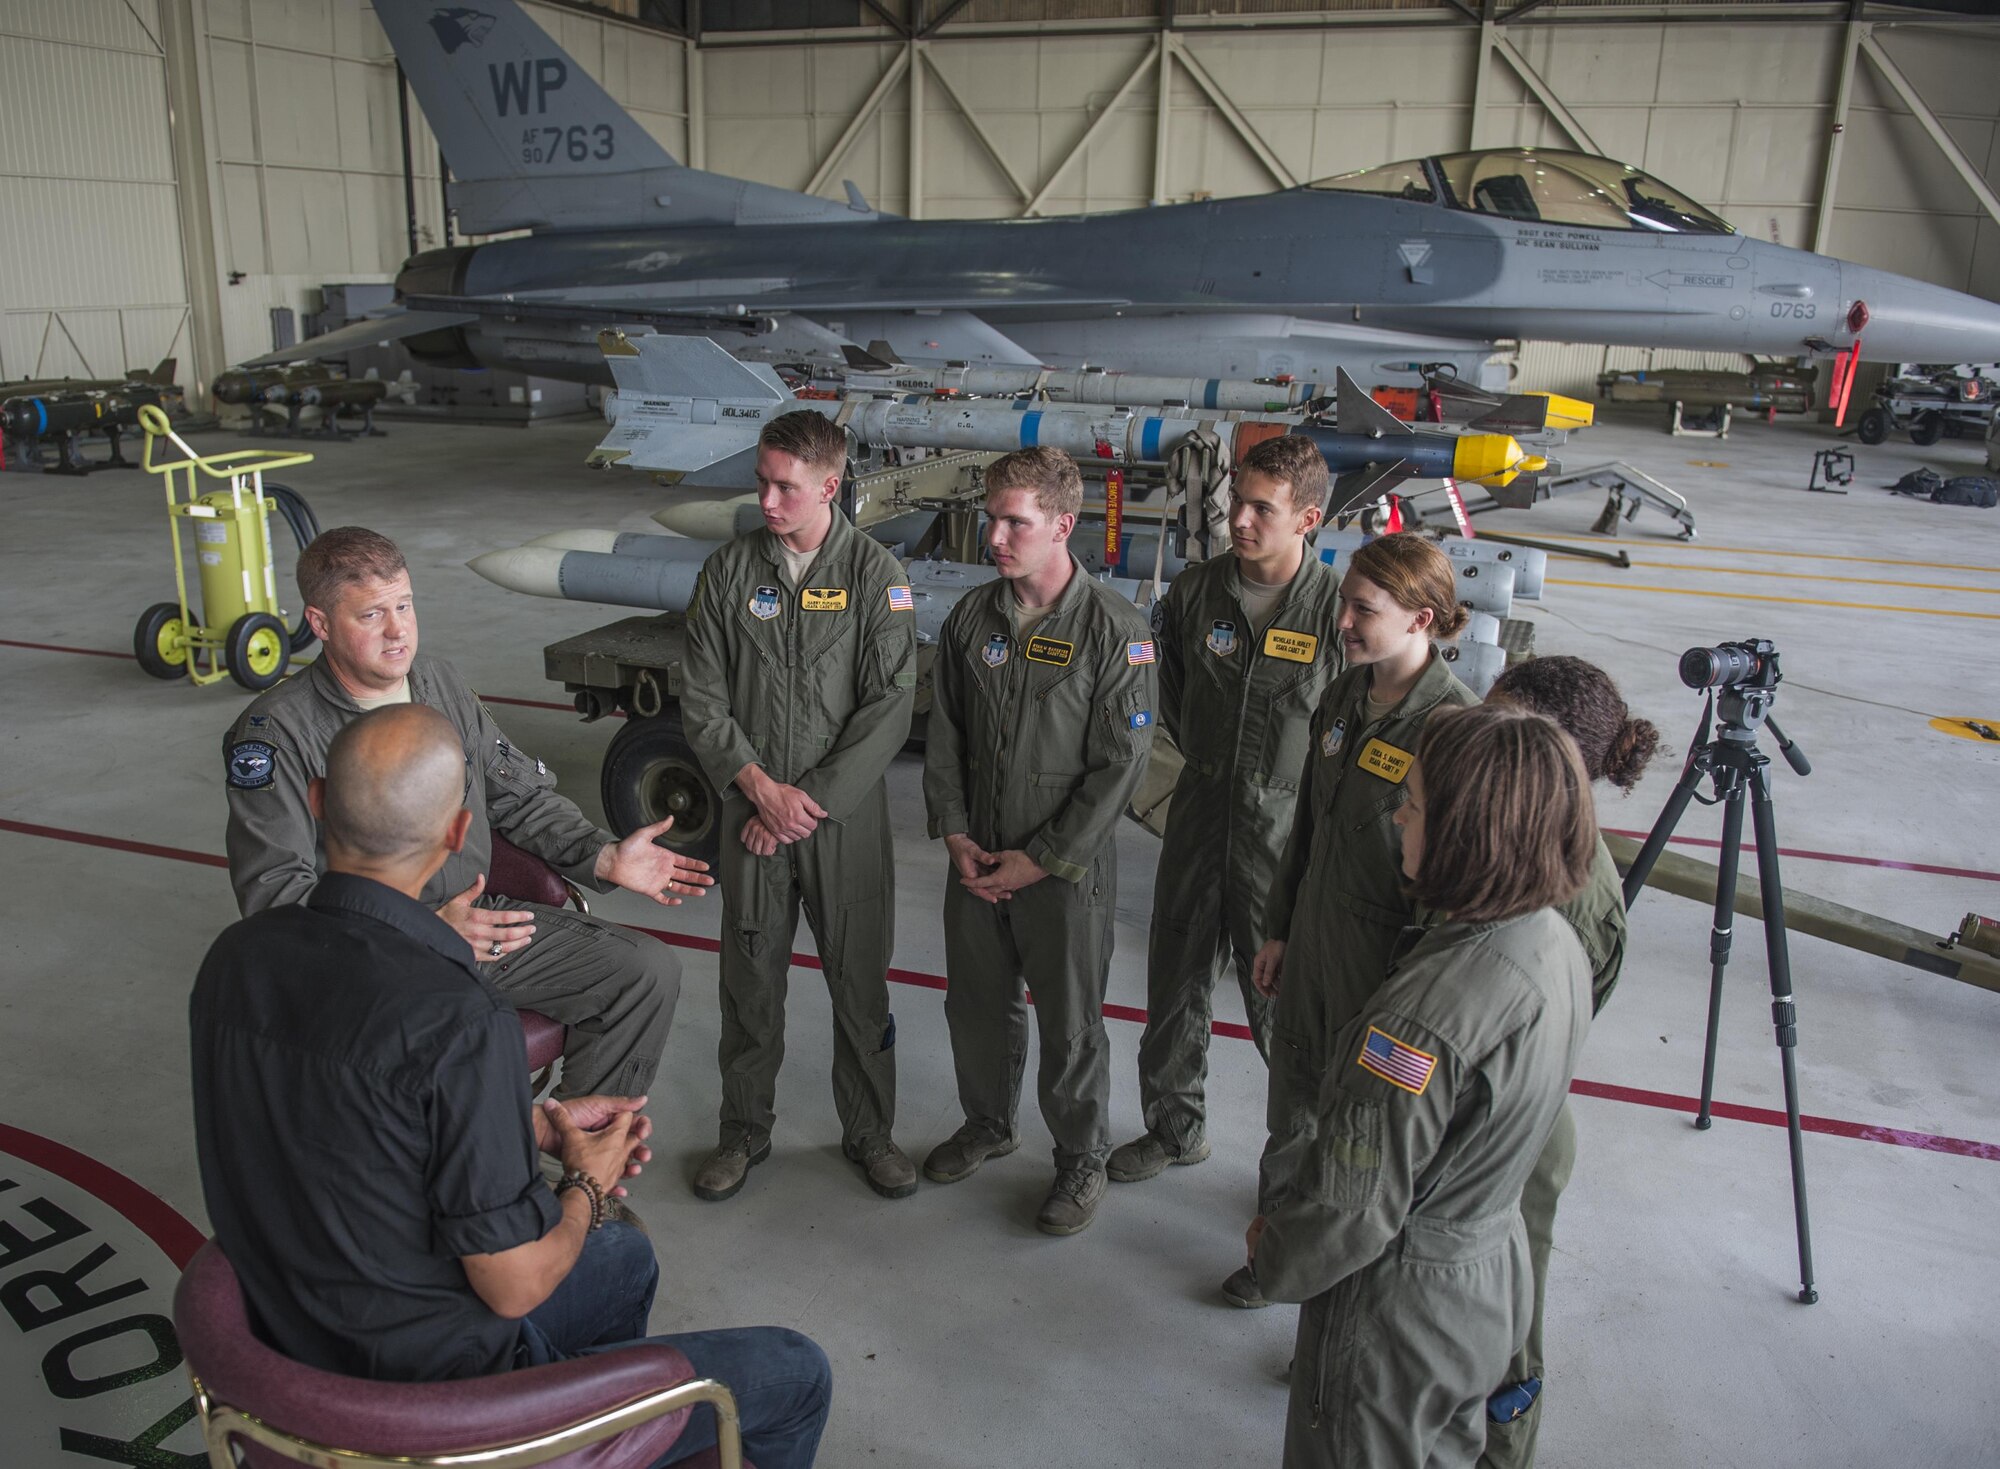 U.S. Air Force Academy Cadets discuss the role of public communications in the Air Force with Col. David Shoemaker, 8th Fighter Wing commander and Vladimir Duthiers, CBS correspondent July 10, 2017, at Kunsan Air Base, Republic of Korea. The cadets had the opportunity to sit in and listen to an interview between Shoemaker and Duthiers as a part of their two and a half week immersion program, known as Operations Air Force. (U.S. Air Force photo by Senior Airman Colville McFee/Released)